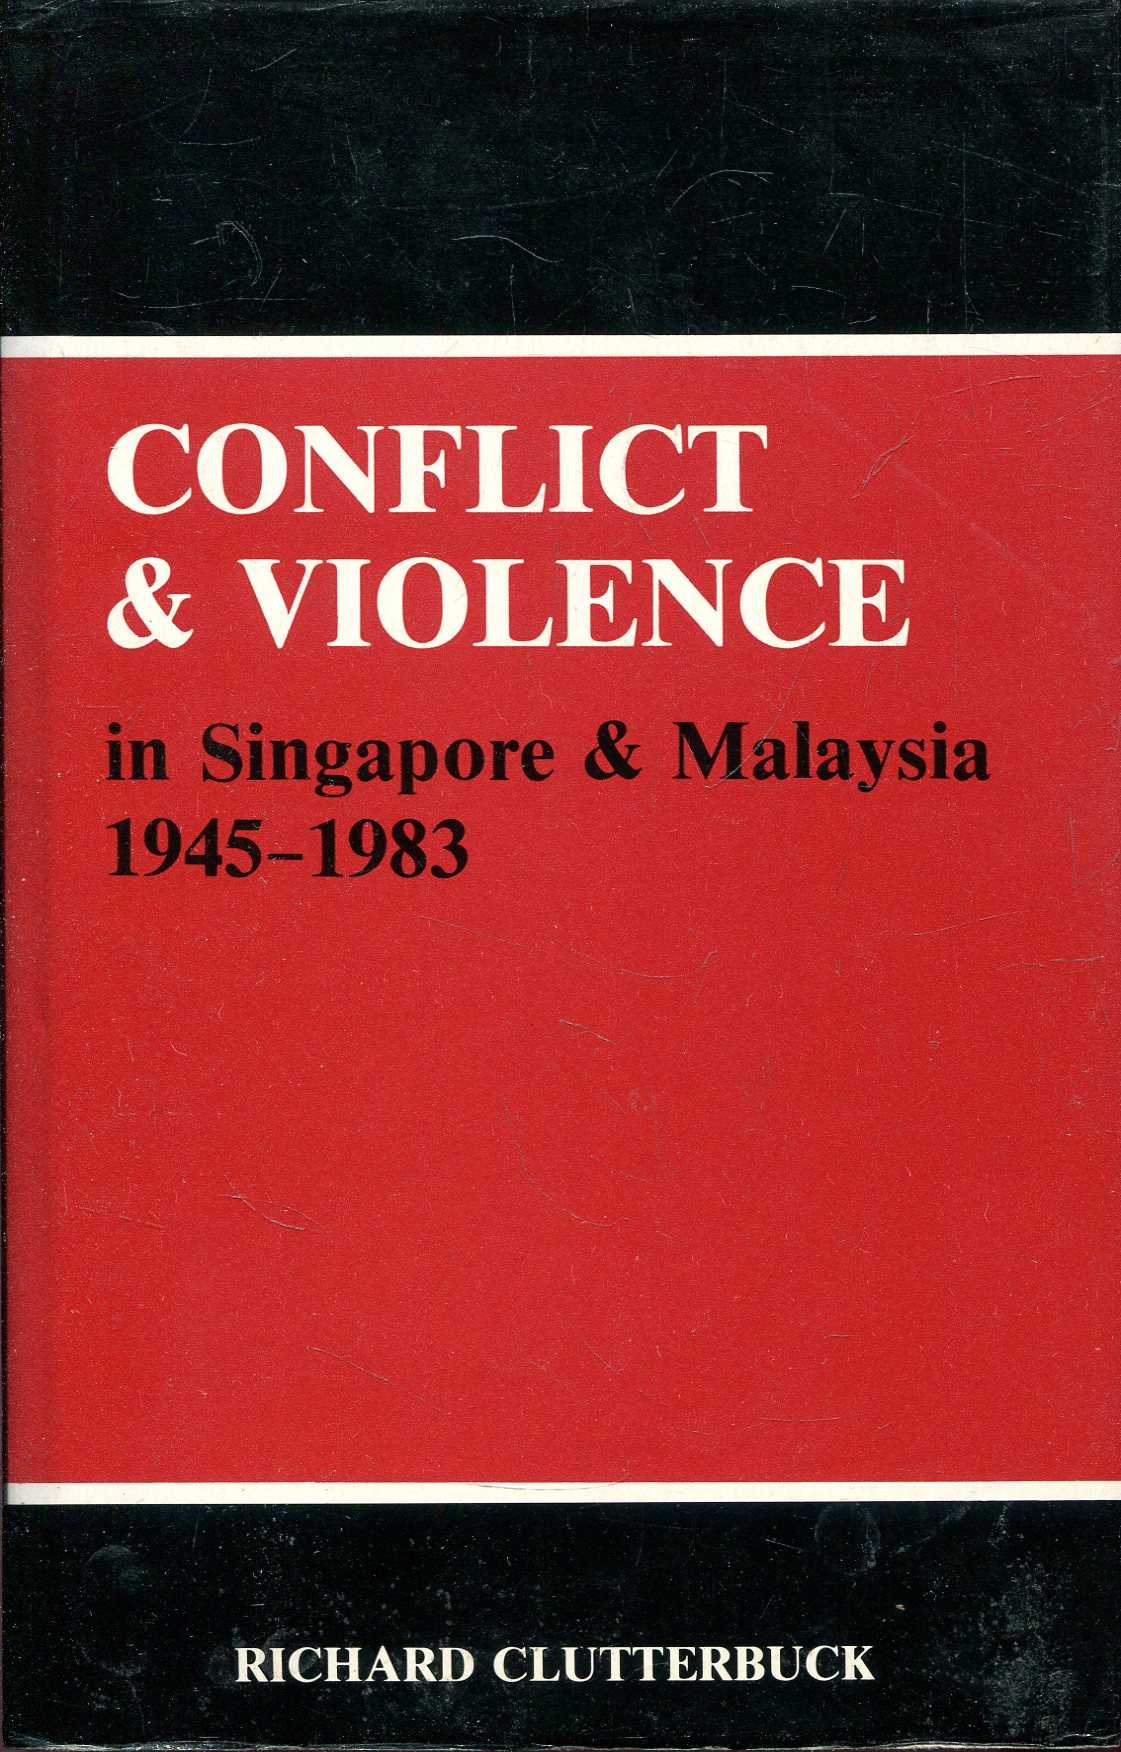 Image for Conflict and Violence in Singapore and Malaysia, 1945-1983